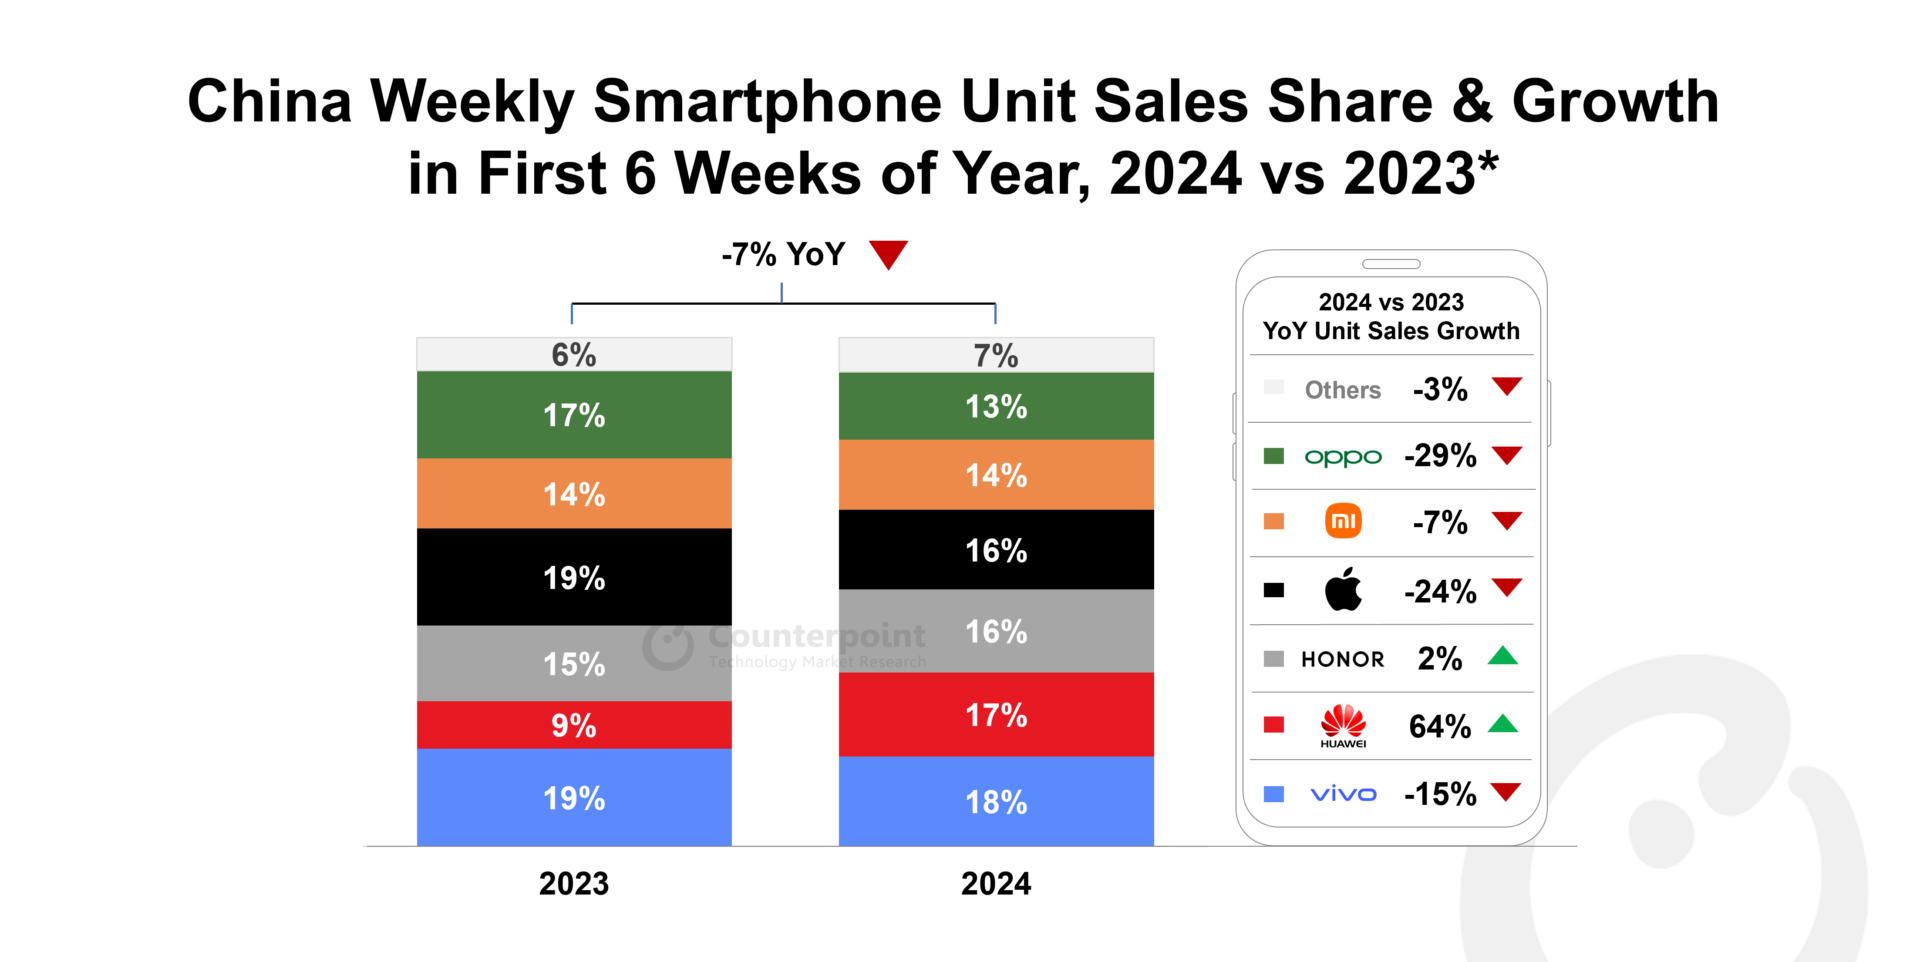 China Weekly Smartphone Unit Sales Share & Growth in First 6 Weeks of Year, 2024 vs 2023